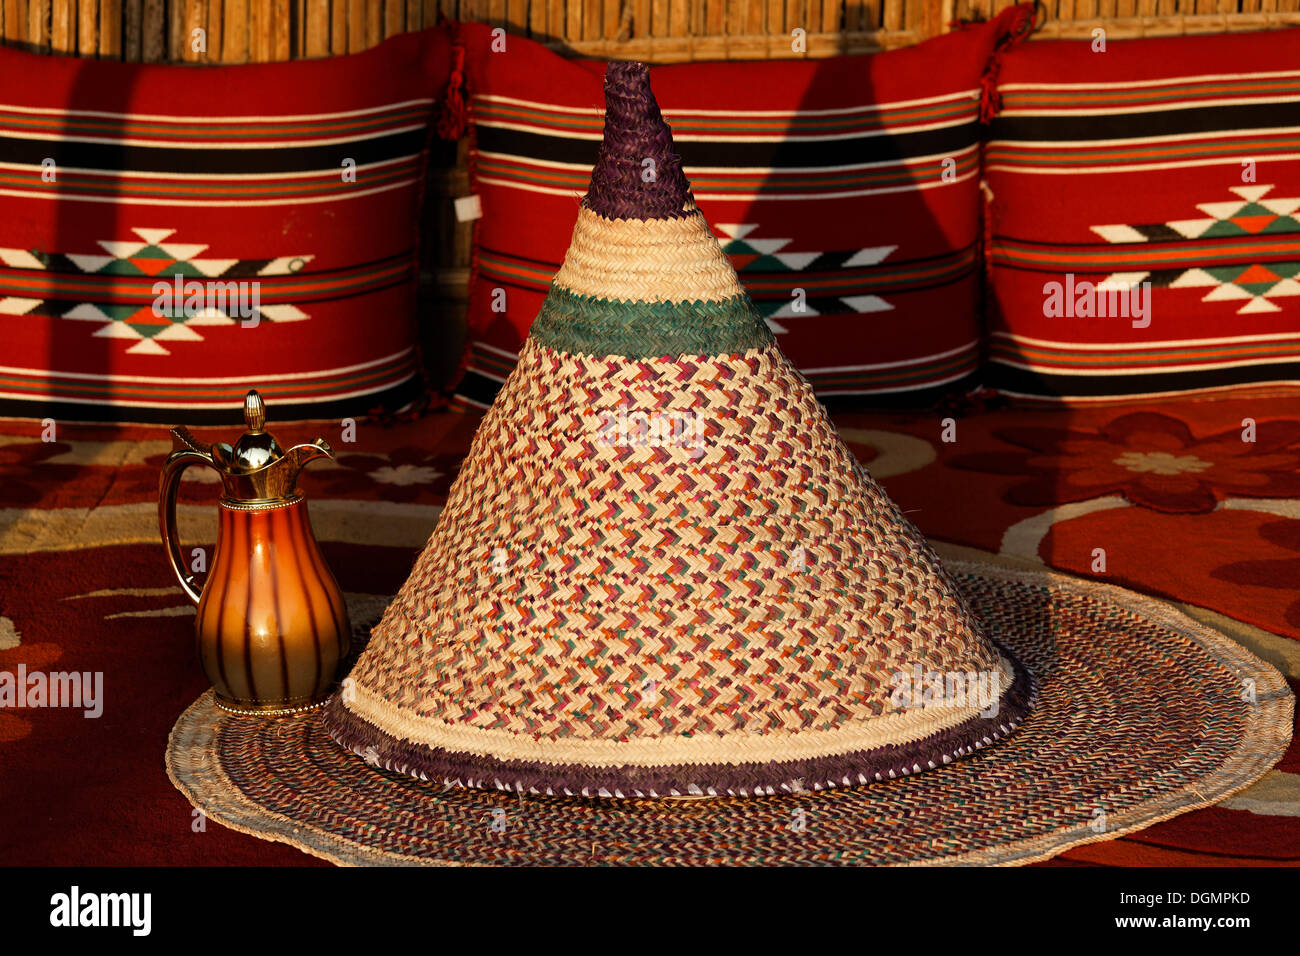 Braided cone as protection for food, Bedouin hut in Heritage Village, Dubai, United Arab Emirates, Middle East, Asia Stock Photo